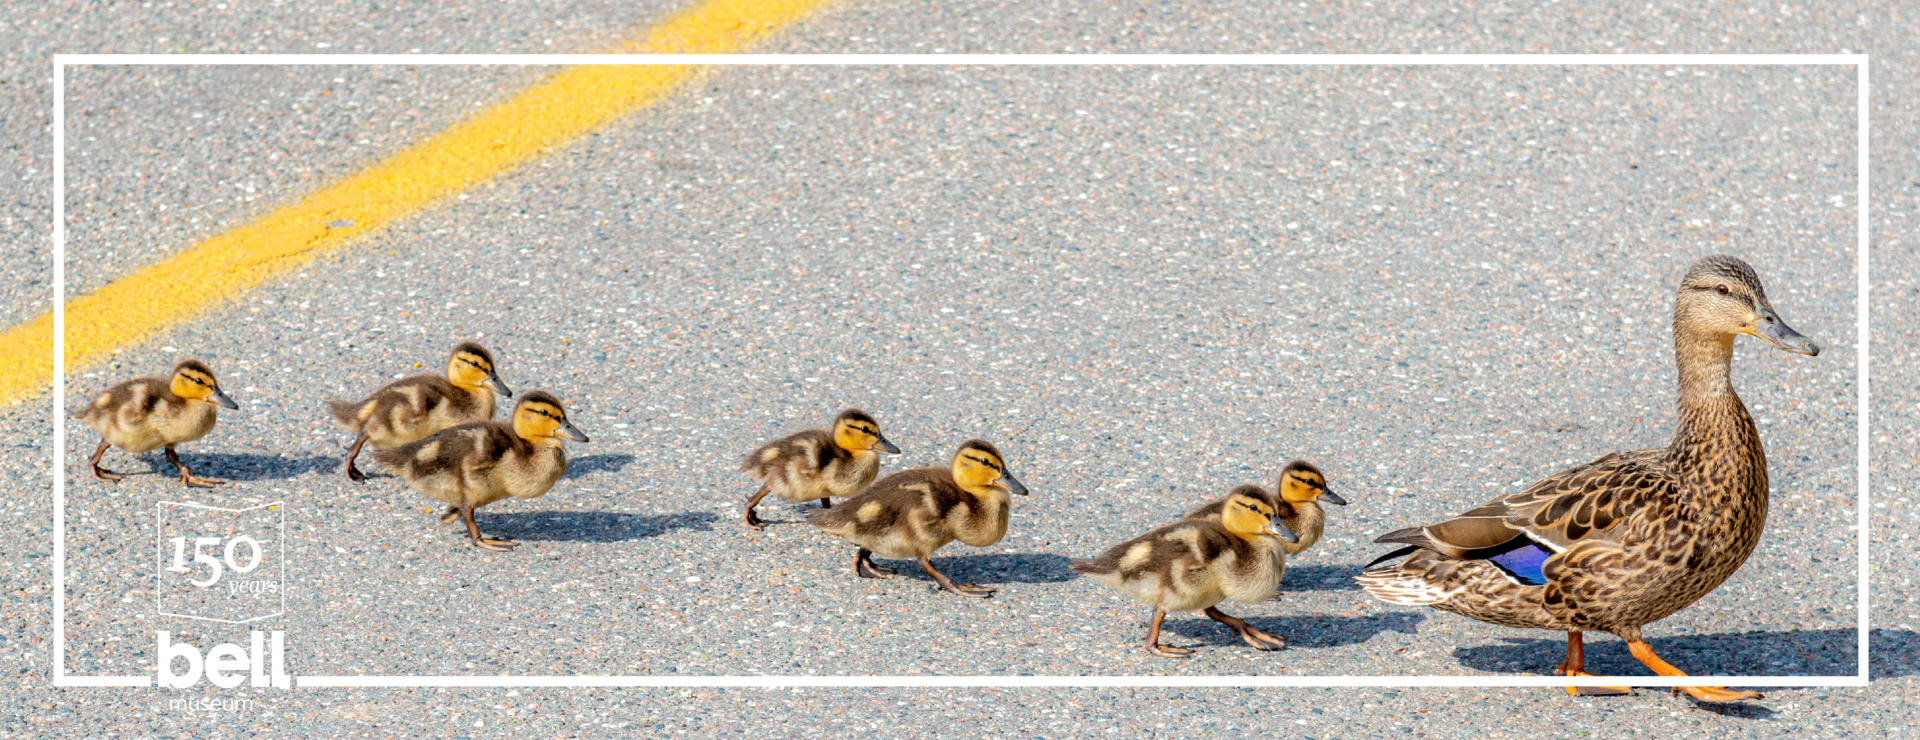 A duck and ducklings crossing the street